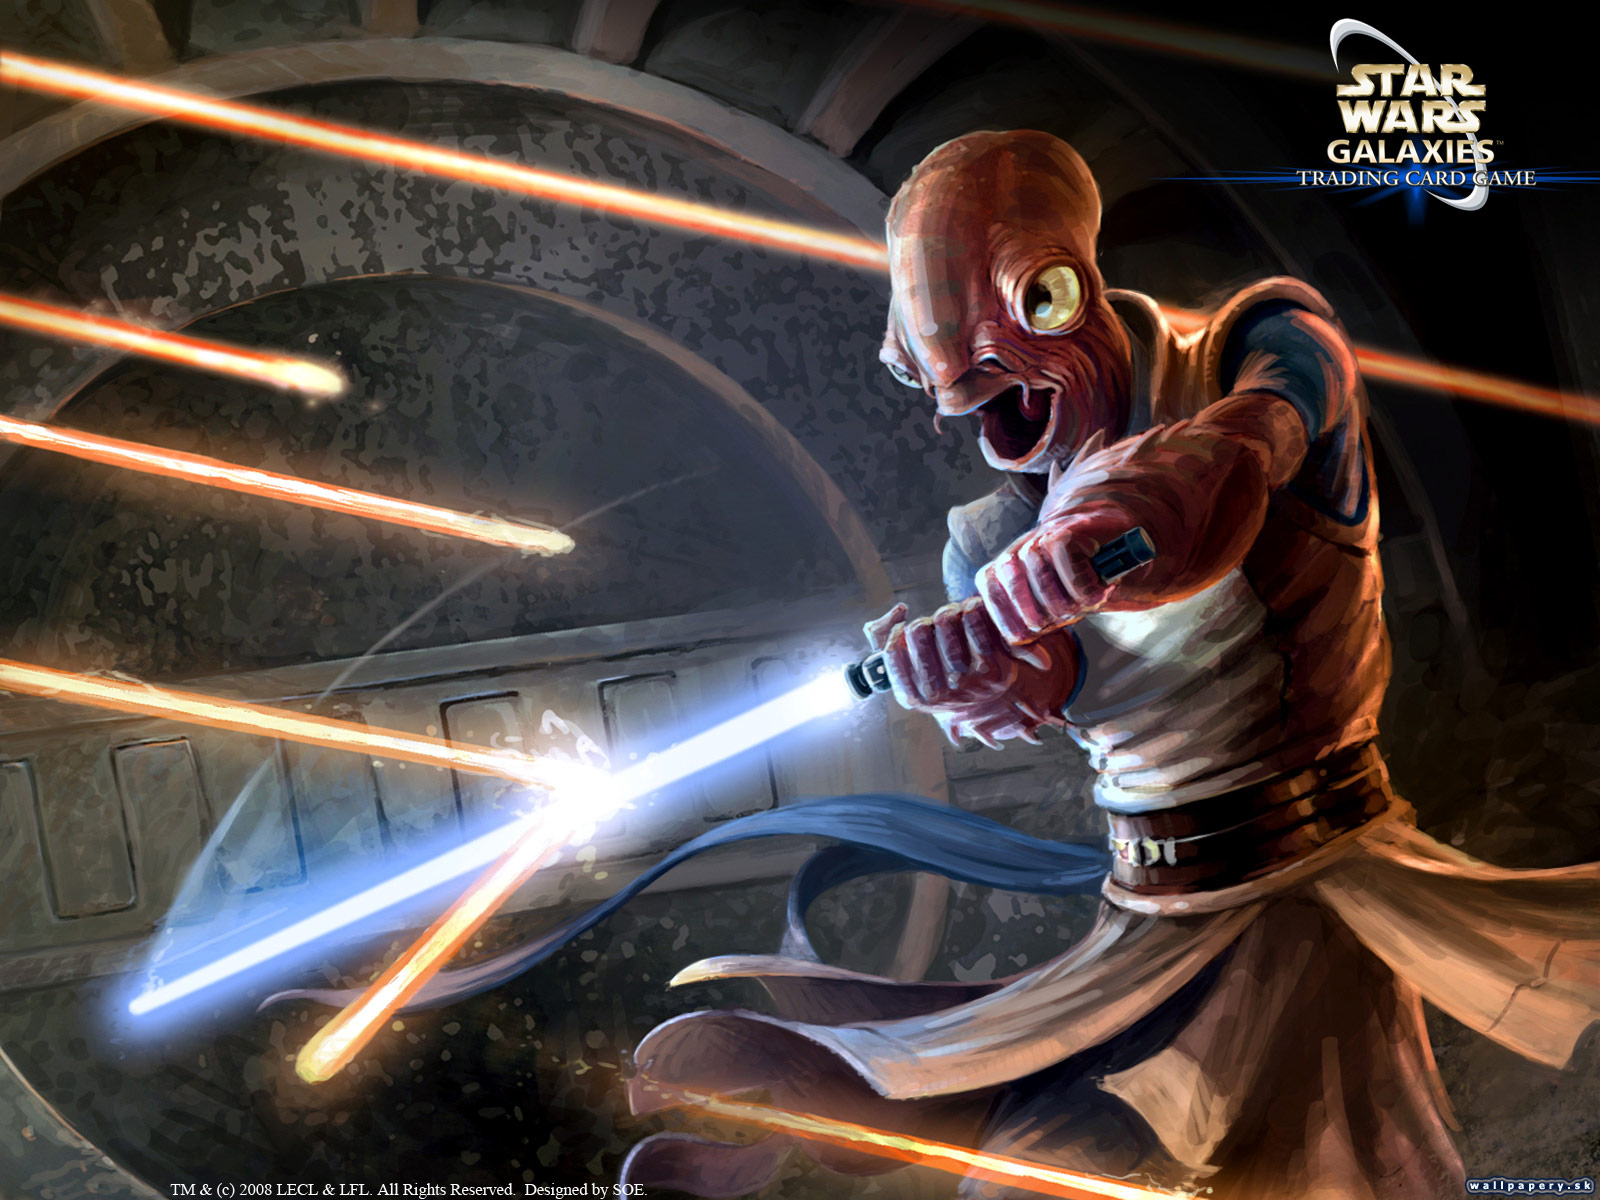 Star Wars Galaxies - Trading Card Game: Champions of the Force - wallpaper 3